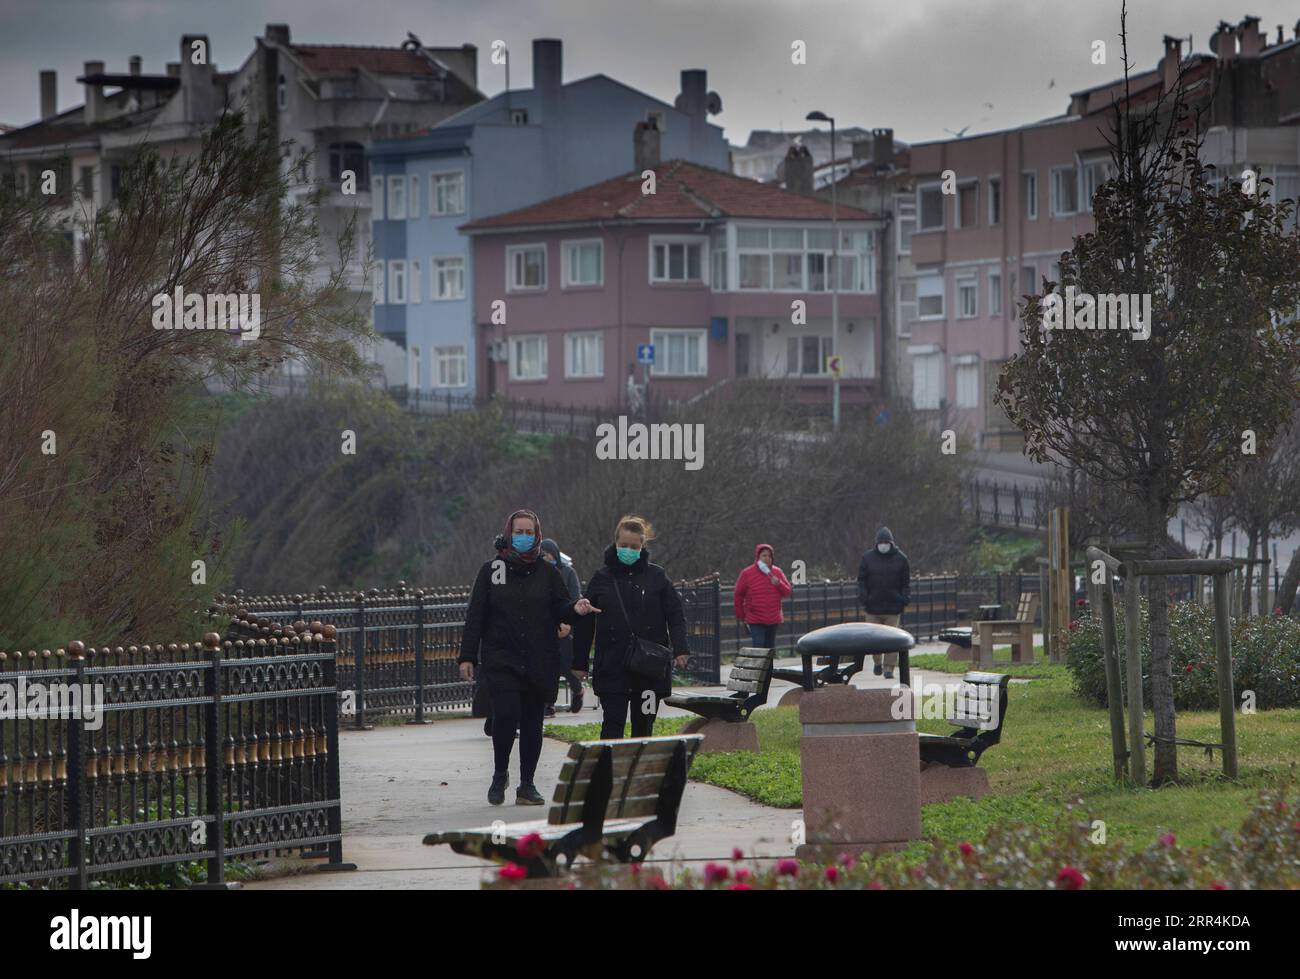 201207 -- SILE TURKEY, Dec. 7, 2020 -- People walk in Sile, a small fishing town some 70 km from Istanbul, Turkey, on Dec. 7, 2020. The concerns with the COVID-19 pandemic are causing more and more residents in Turkey s largest city Istanbul to move to the city s remote seaside districts along the shores of the Black Sea and the Marmara Sea. Photo by /Xinhua TO GO WITH Feature: Istanbul residents move to remote seaside areas over COVID-19 concerns TURKEY-SILE-ISTANBUL RESIDENTS-COVID-19-CONCERNS OsmanxOrsal PUBLICATIONxNOTxINxCHN Stock Photo